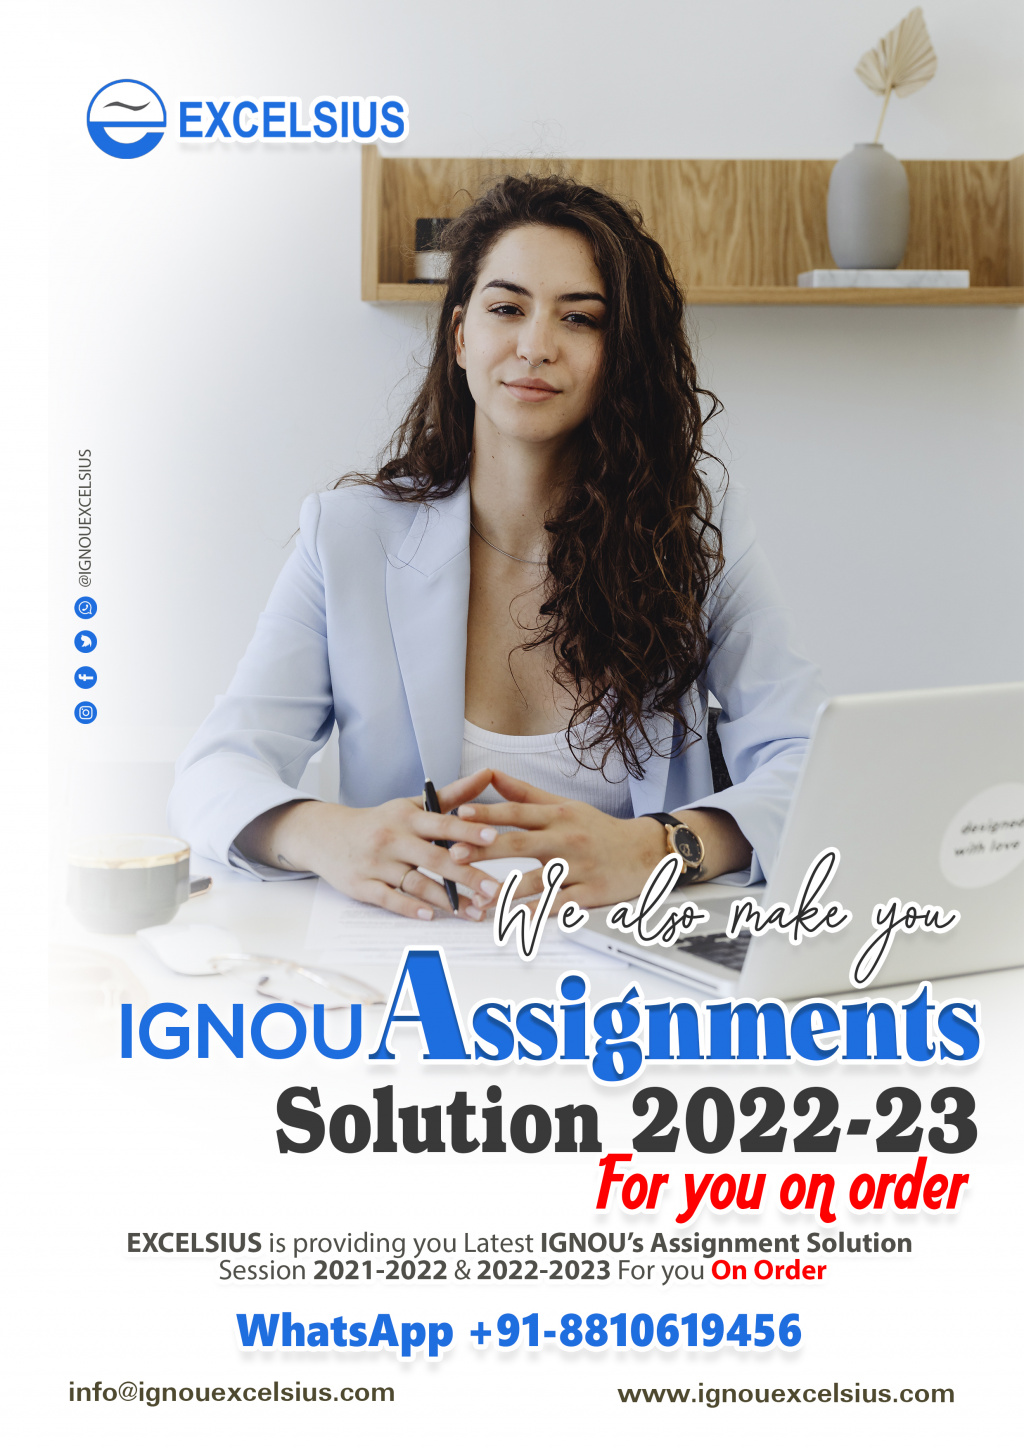 IGNOU Assignment Solution 2022-23